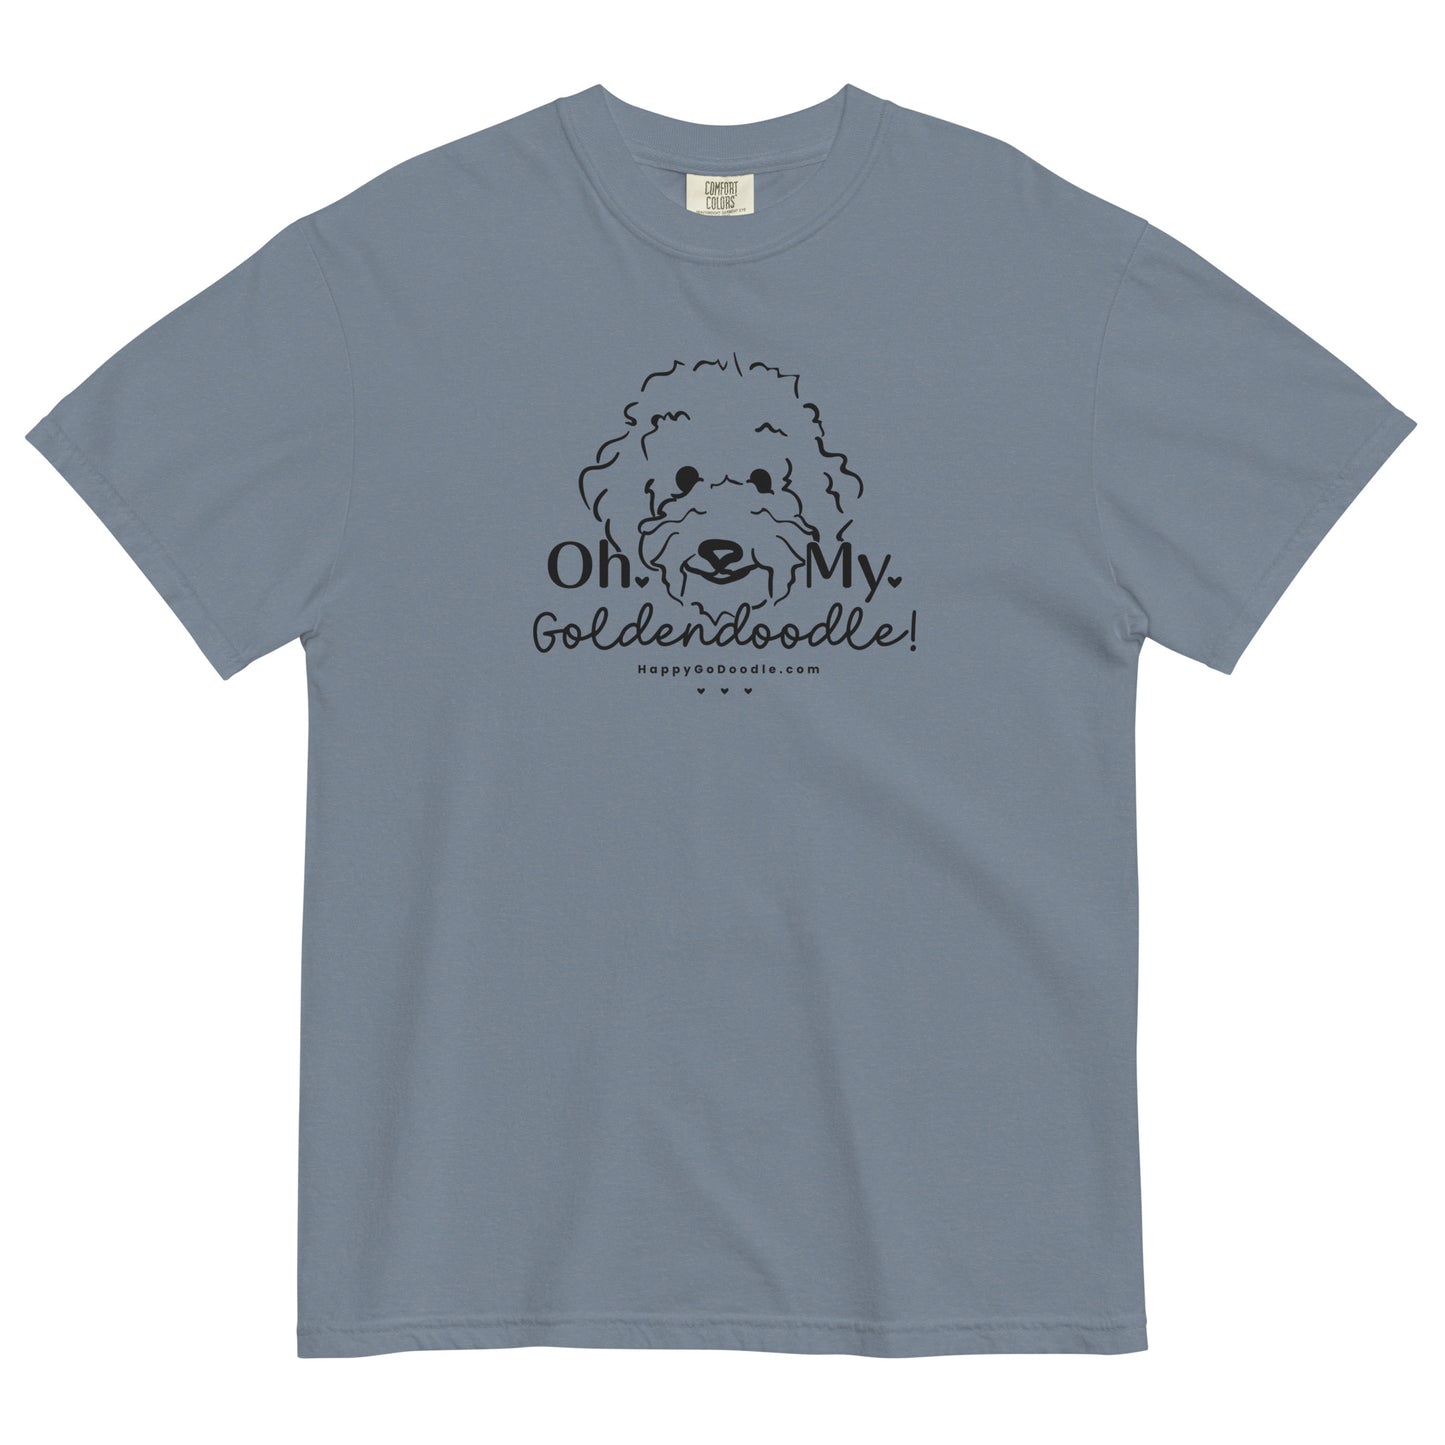 Goldendoodle comfort colors t-shirt with Goldendoodle face and words "Oh My Goldendoodle" in blue jean color